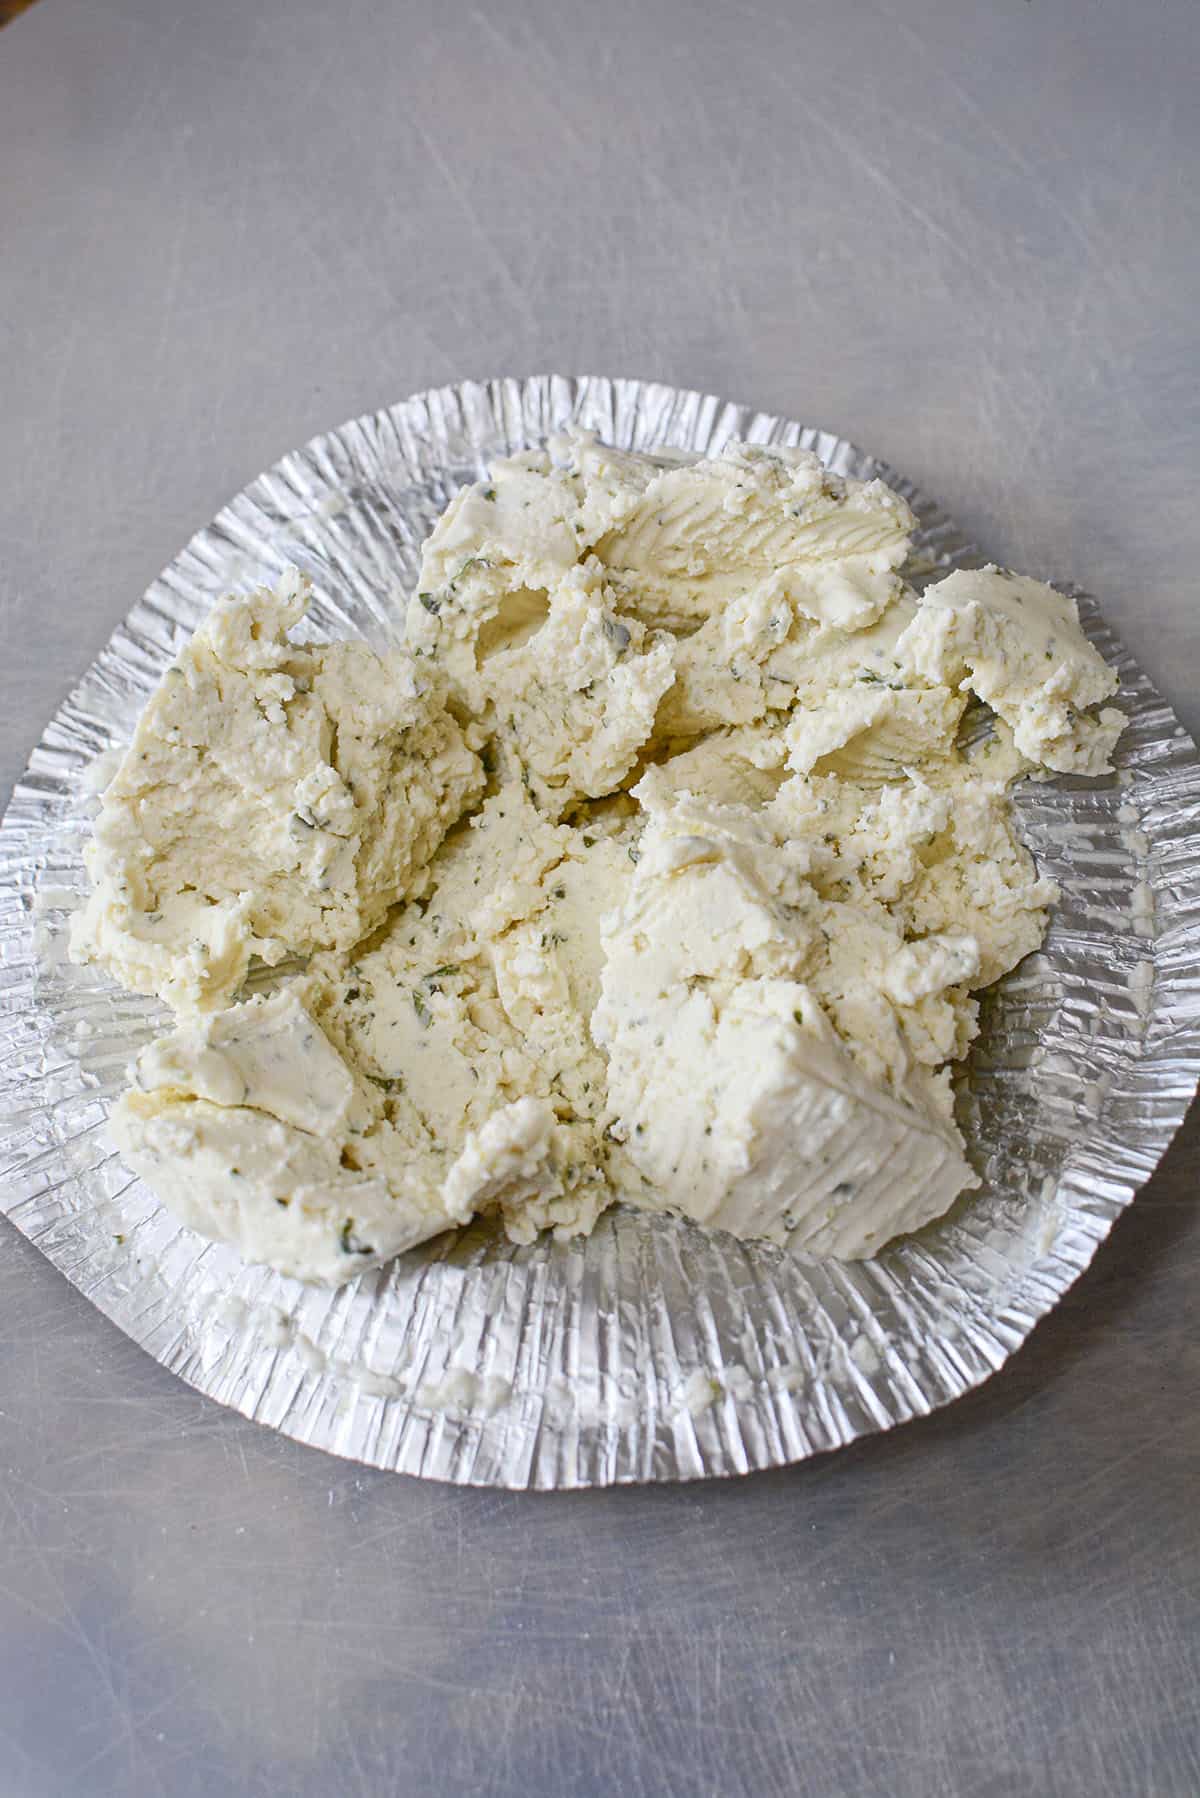 Crumbled Boursin cheese.